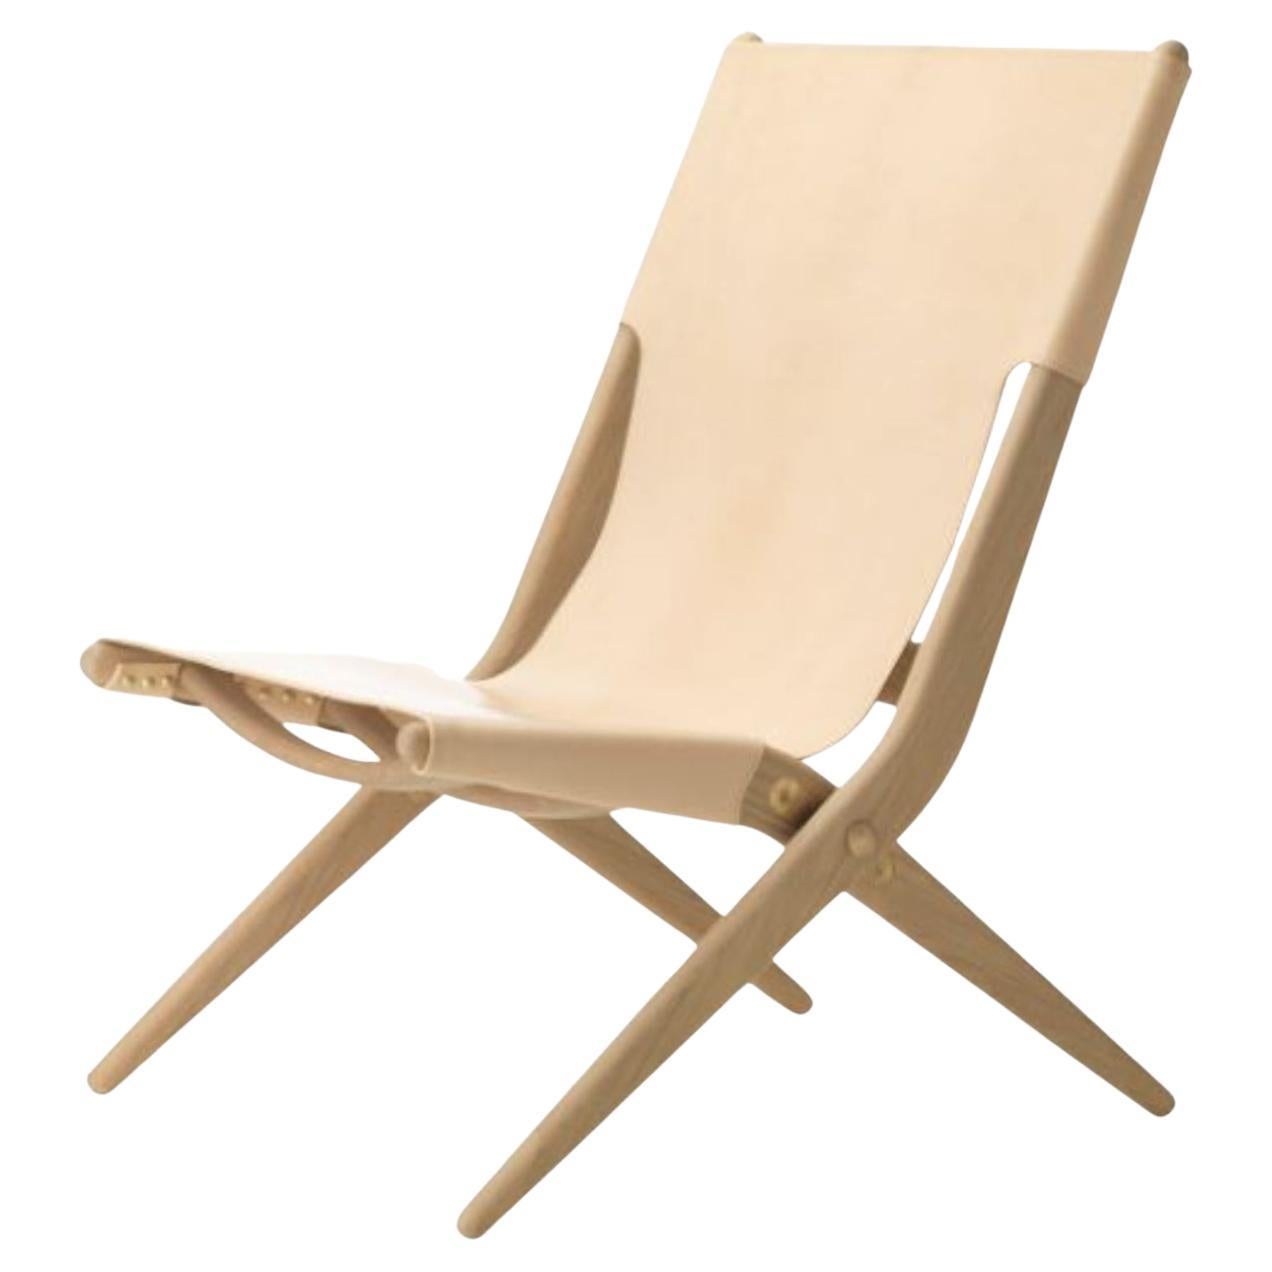 Natural Leather Saxe Chair by Lassen